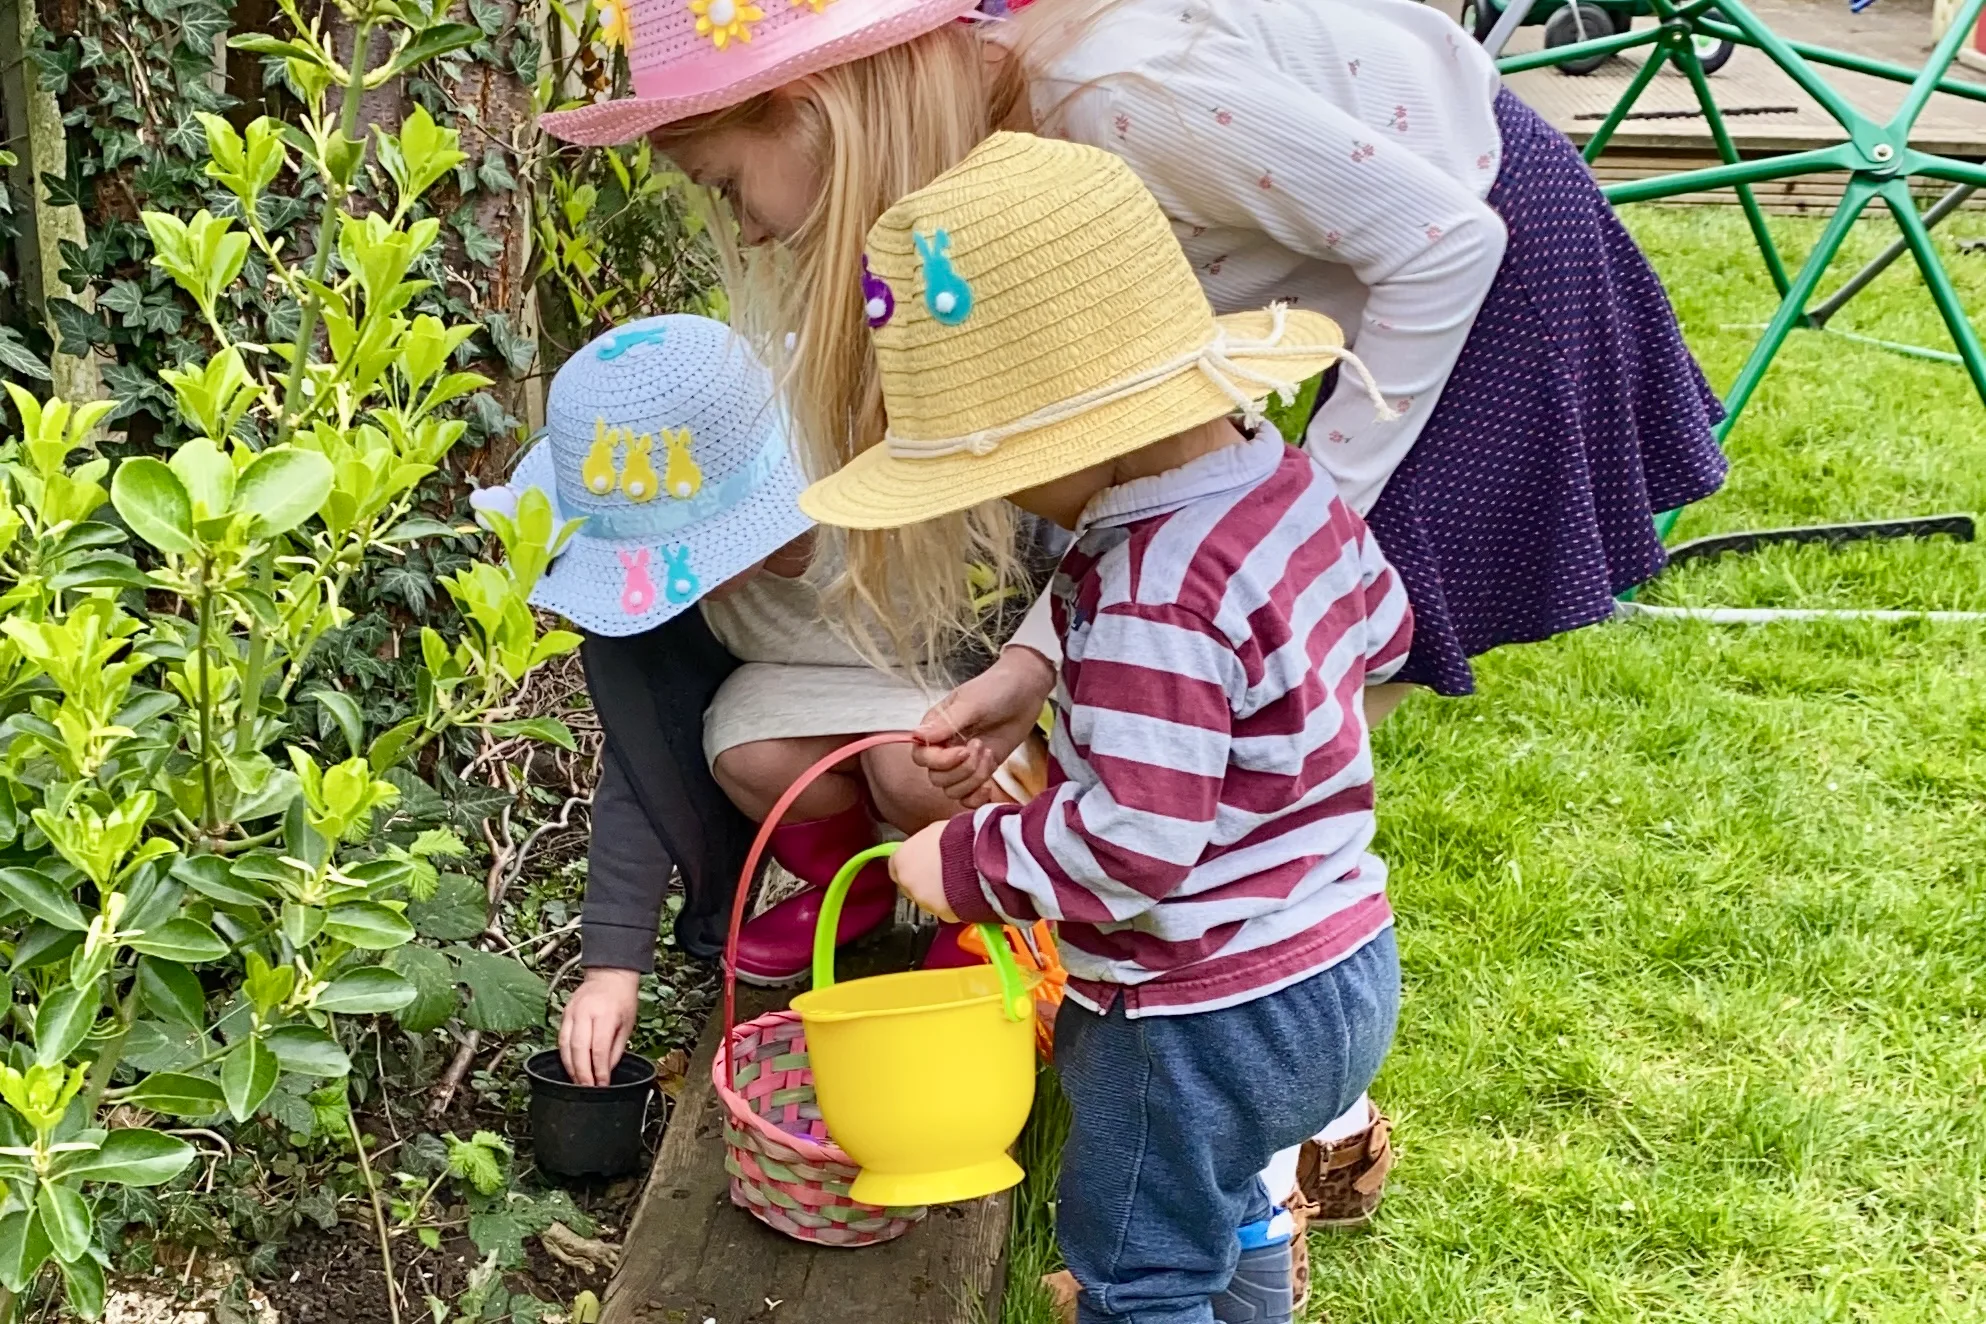 3 children with baskets and Easter bonnets looking for Easter eggs